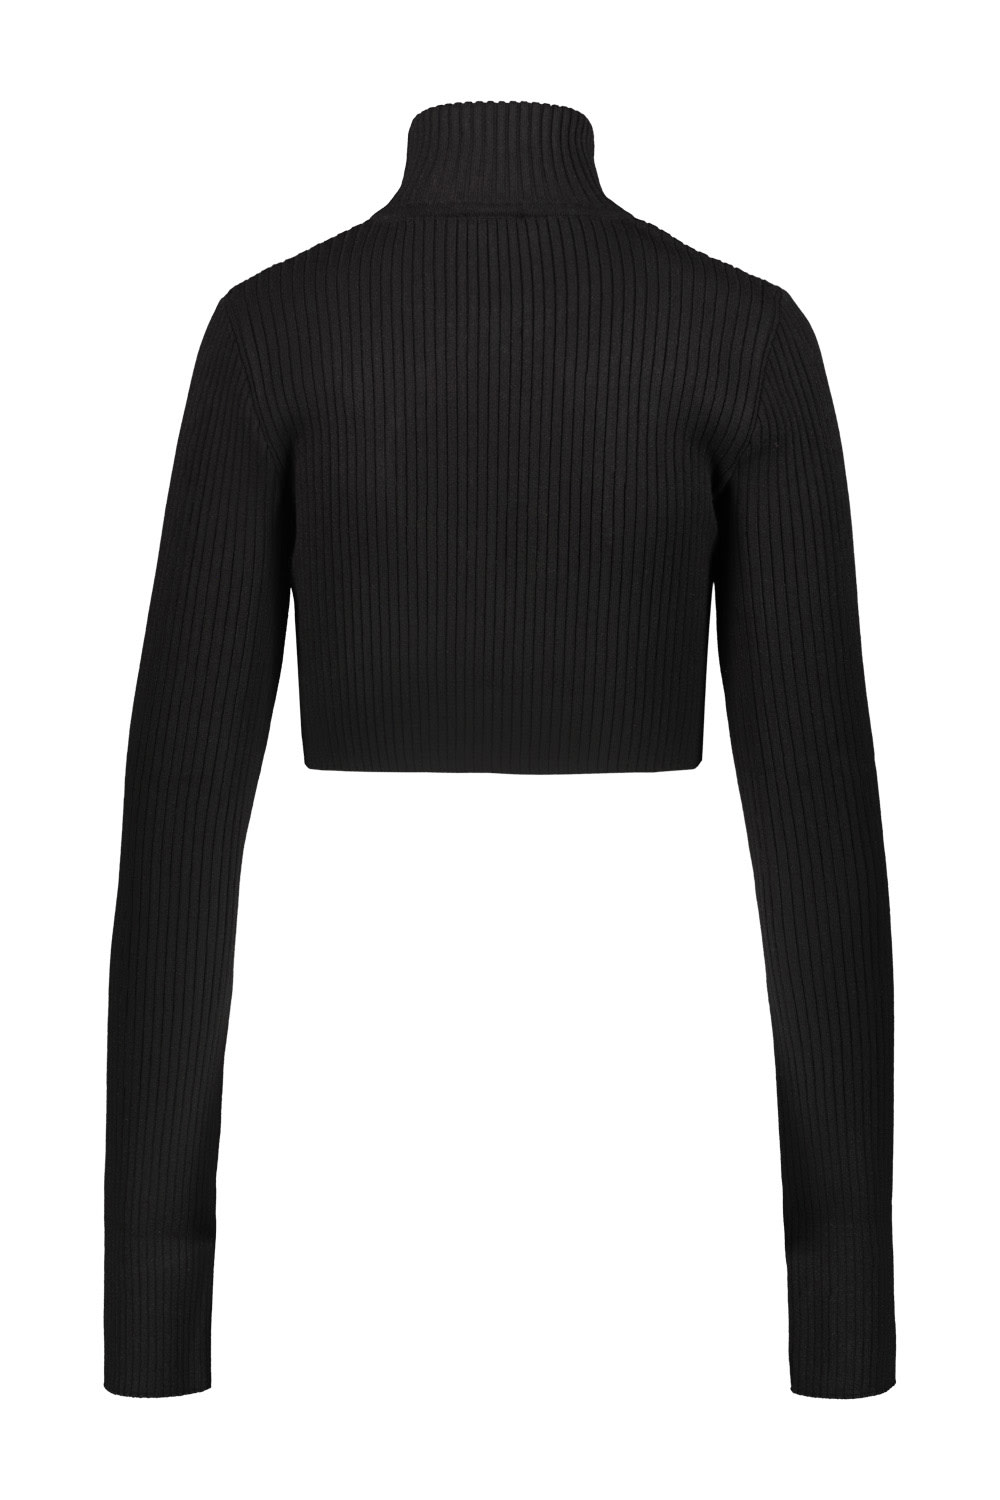 Shop Courrèges Cropped Sweater Circle Mockneck Rib Knit In Black